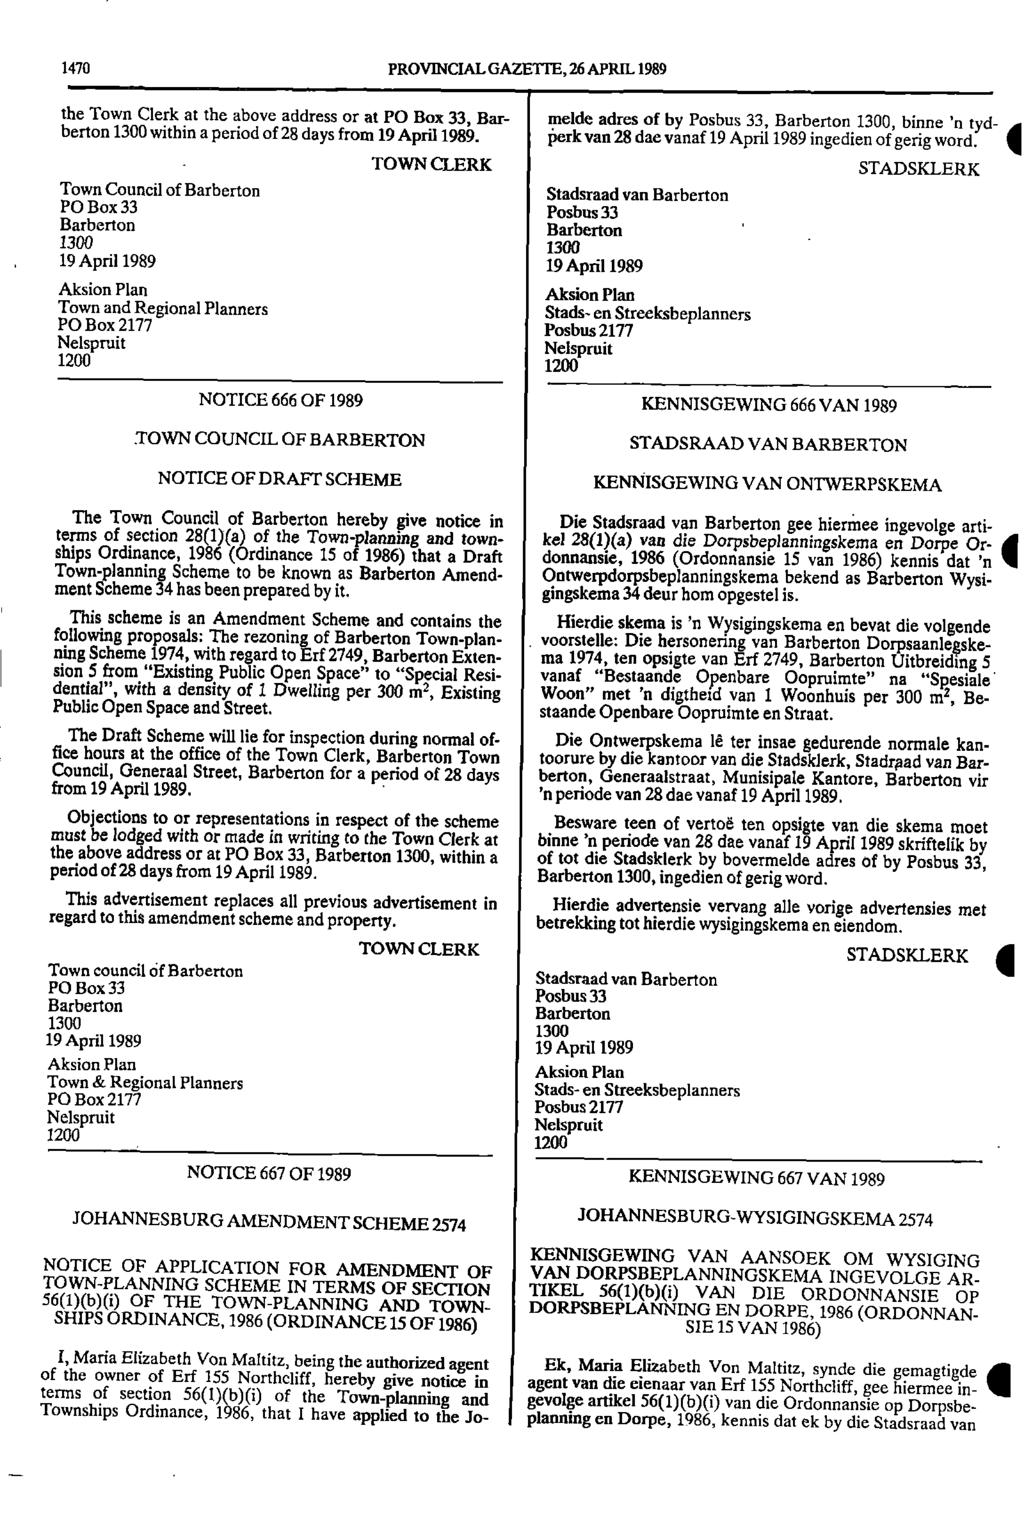 1470 PROVINCIAL GAZETTE, 26 APRIL 1989 the Town Clerk at the above address or at PO Box 33, Barberton 1300 within a period of 28 days from 19 April 1989 melde adres of by Posbus 33, Barberton 1300,